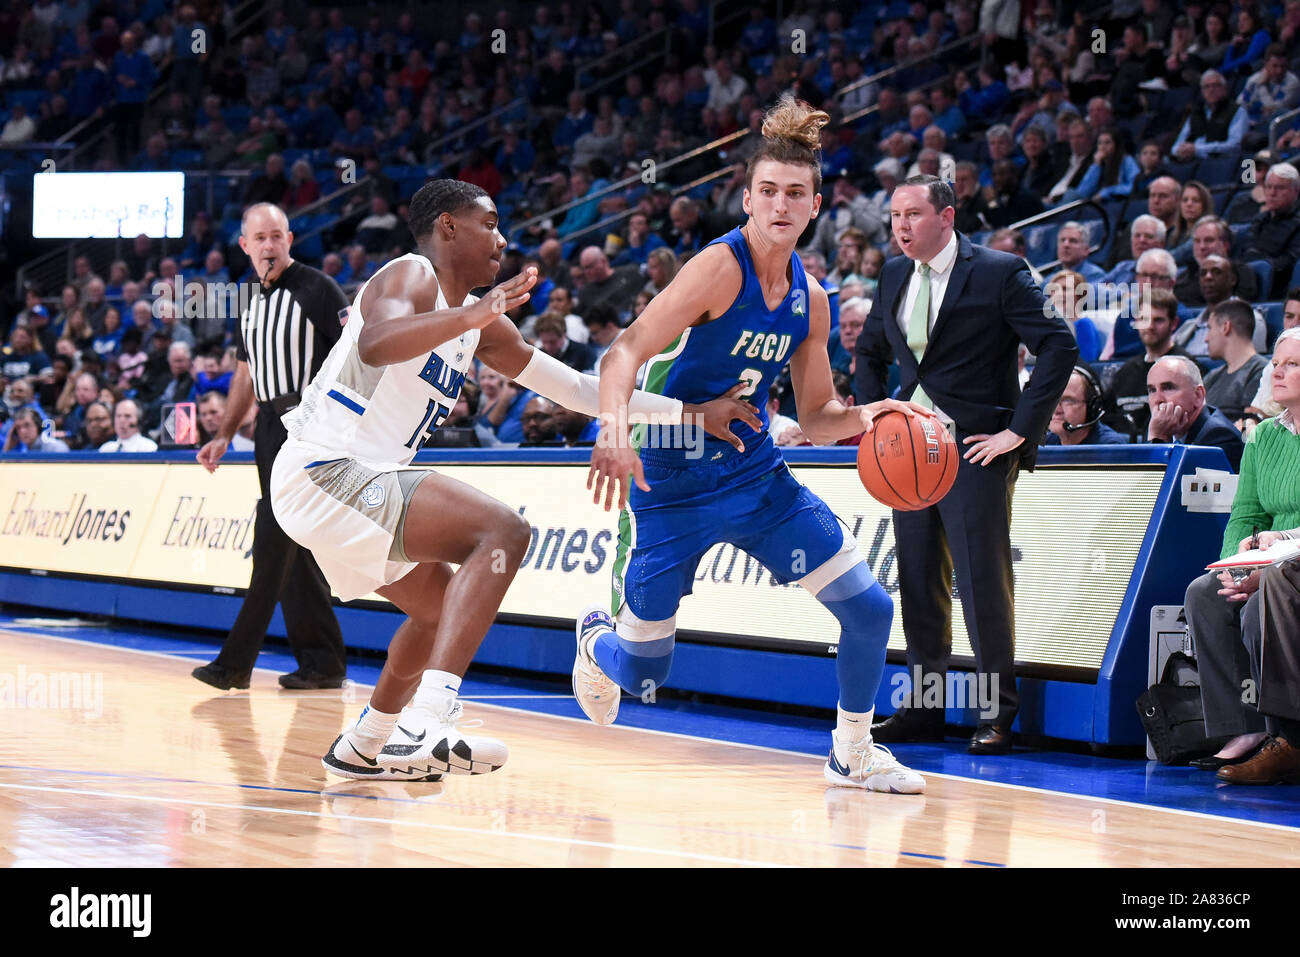 Nov 05, 2019: Florida Gulf Coast Eagles guard Caleb Catto (2) tries to get past the defense of Saint Louis Billikens guard Demarius Jacobs (15) during a regular season game where the Florida Gulf Coast Eagles visited the St. Louis Billikens. Held at Chaifetz Arena in St. Louis, MO Richard Ulreich/CSM Stock Photo